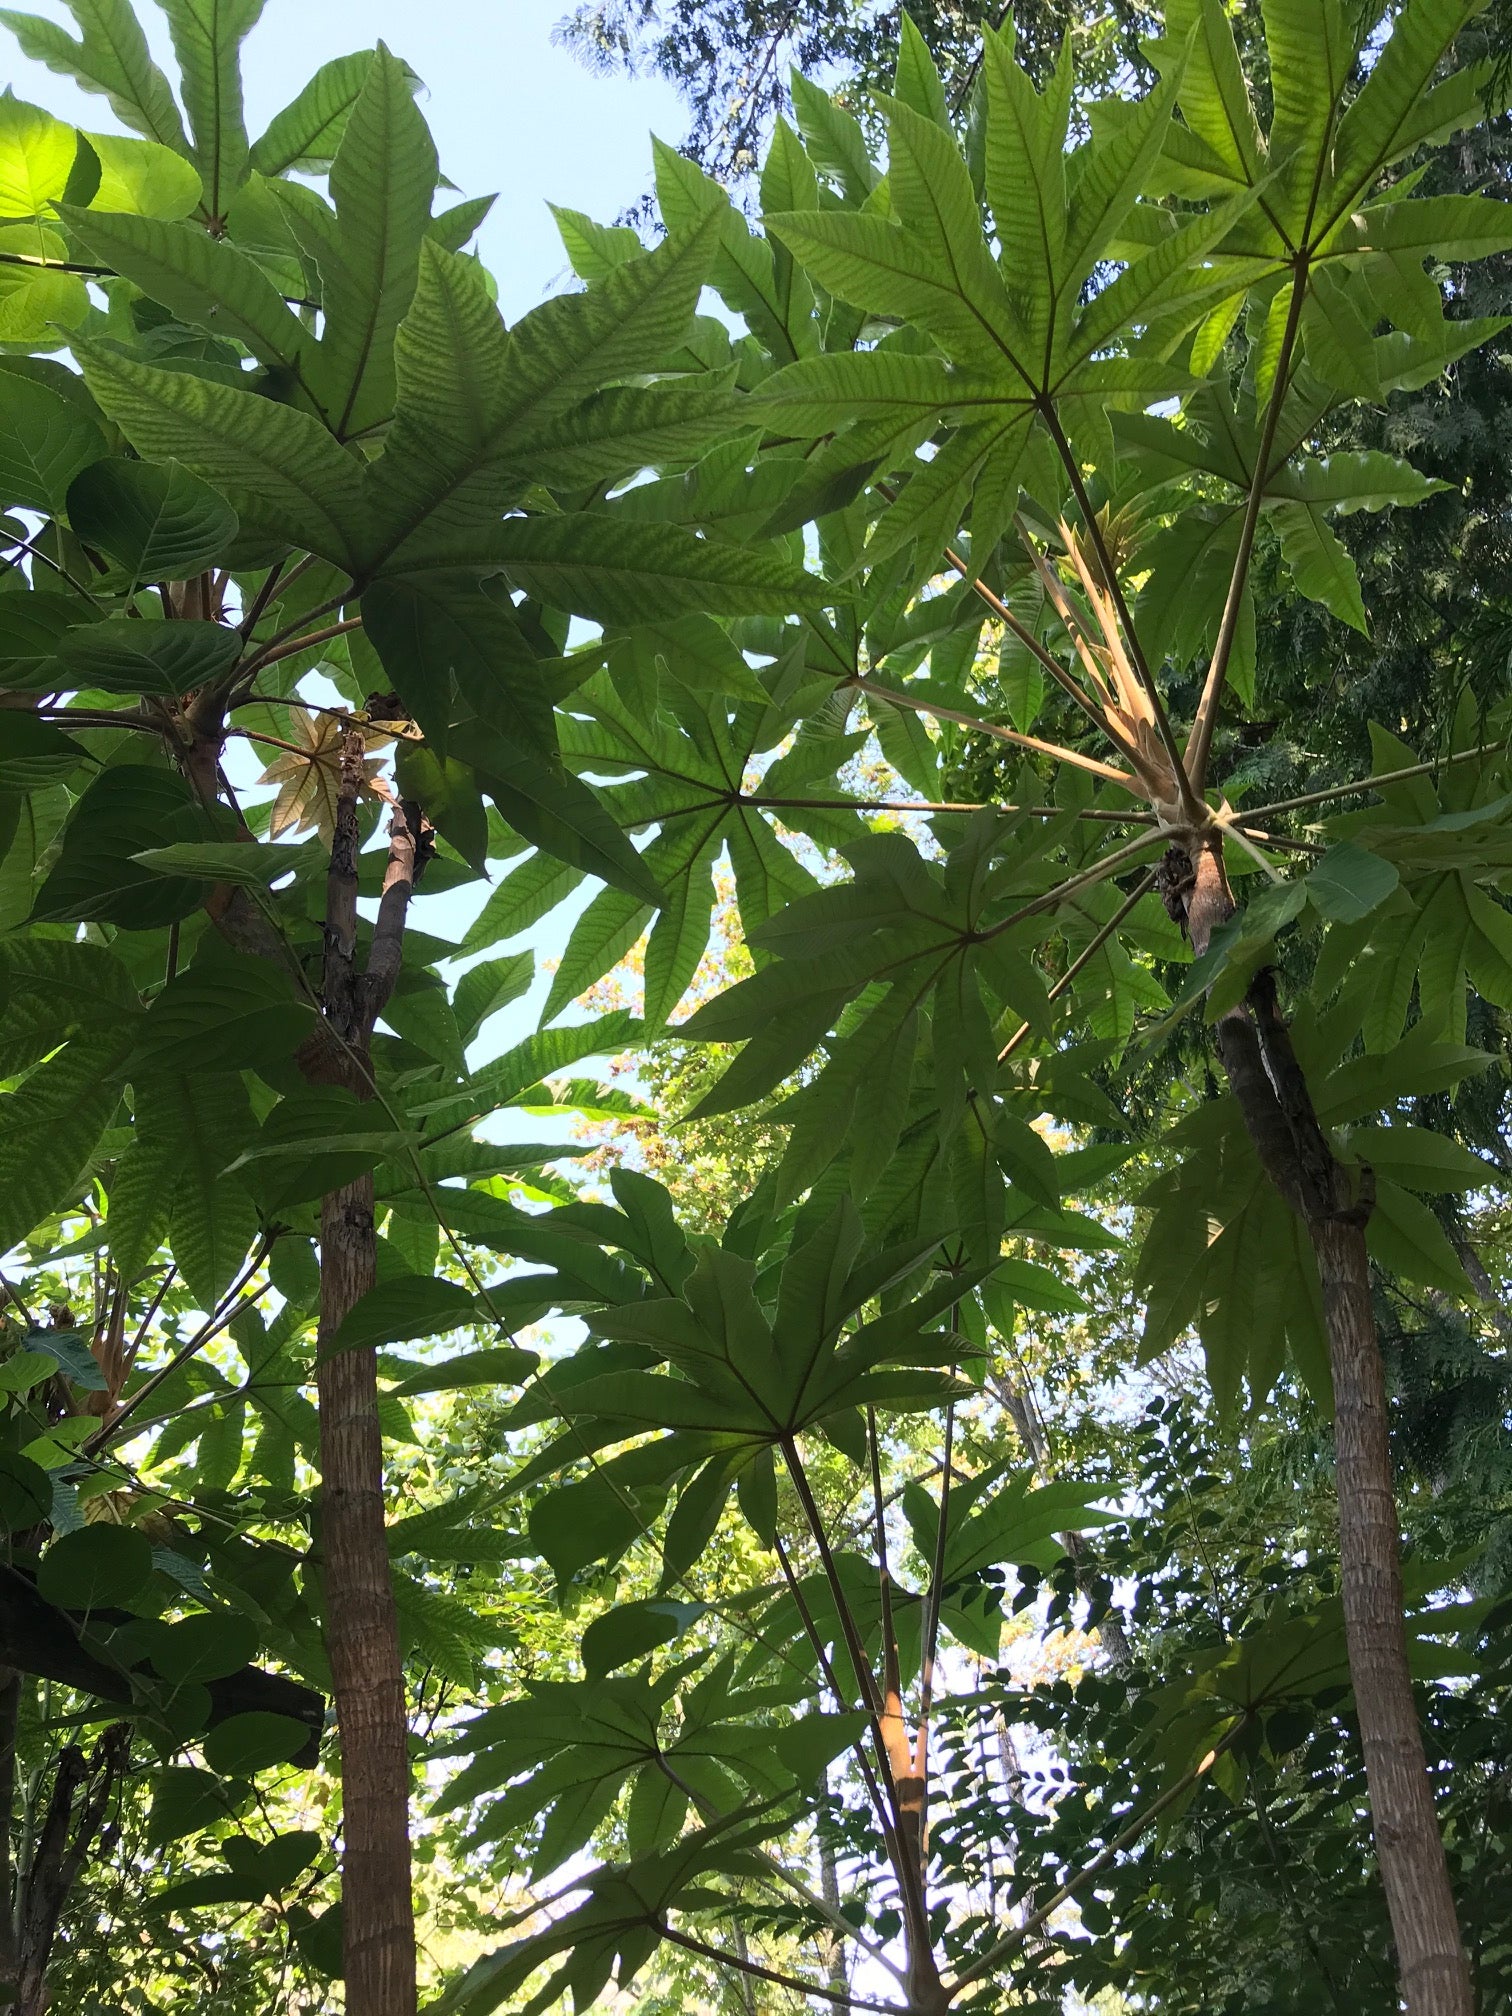 Tetrapanax papyrifer 'Steroidal Giant' (Steroidal Giant Rice Paper Plant)